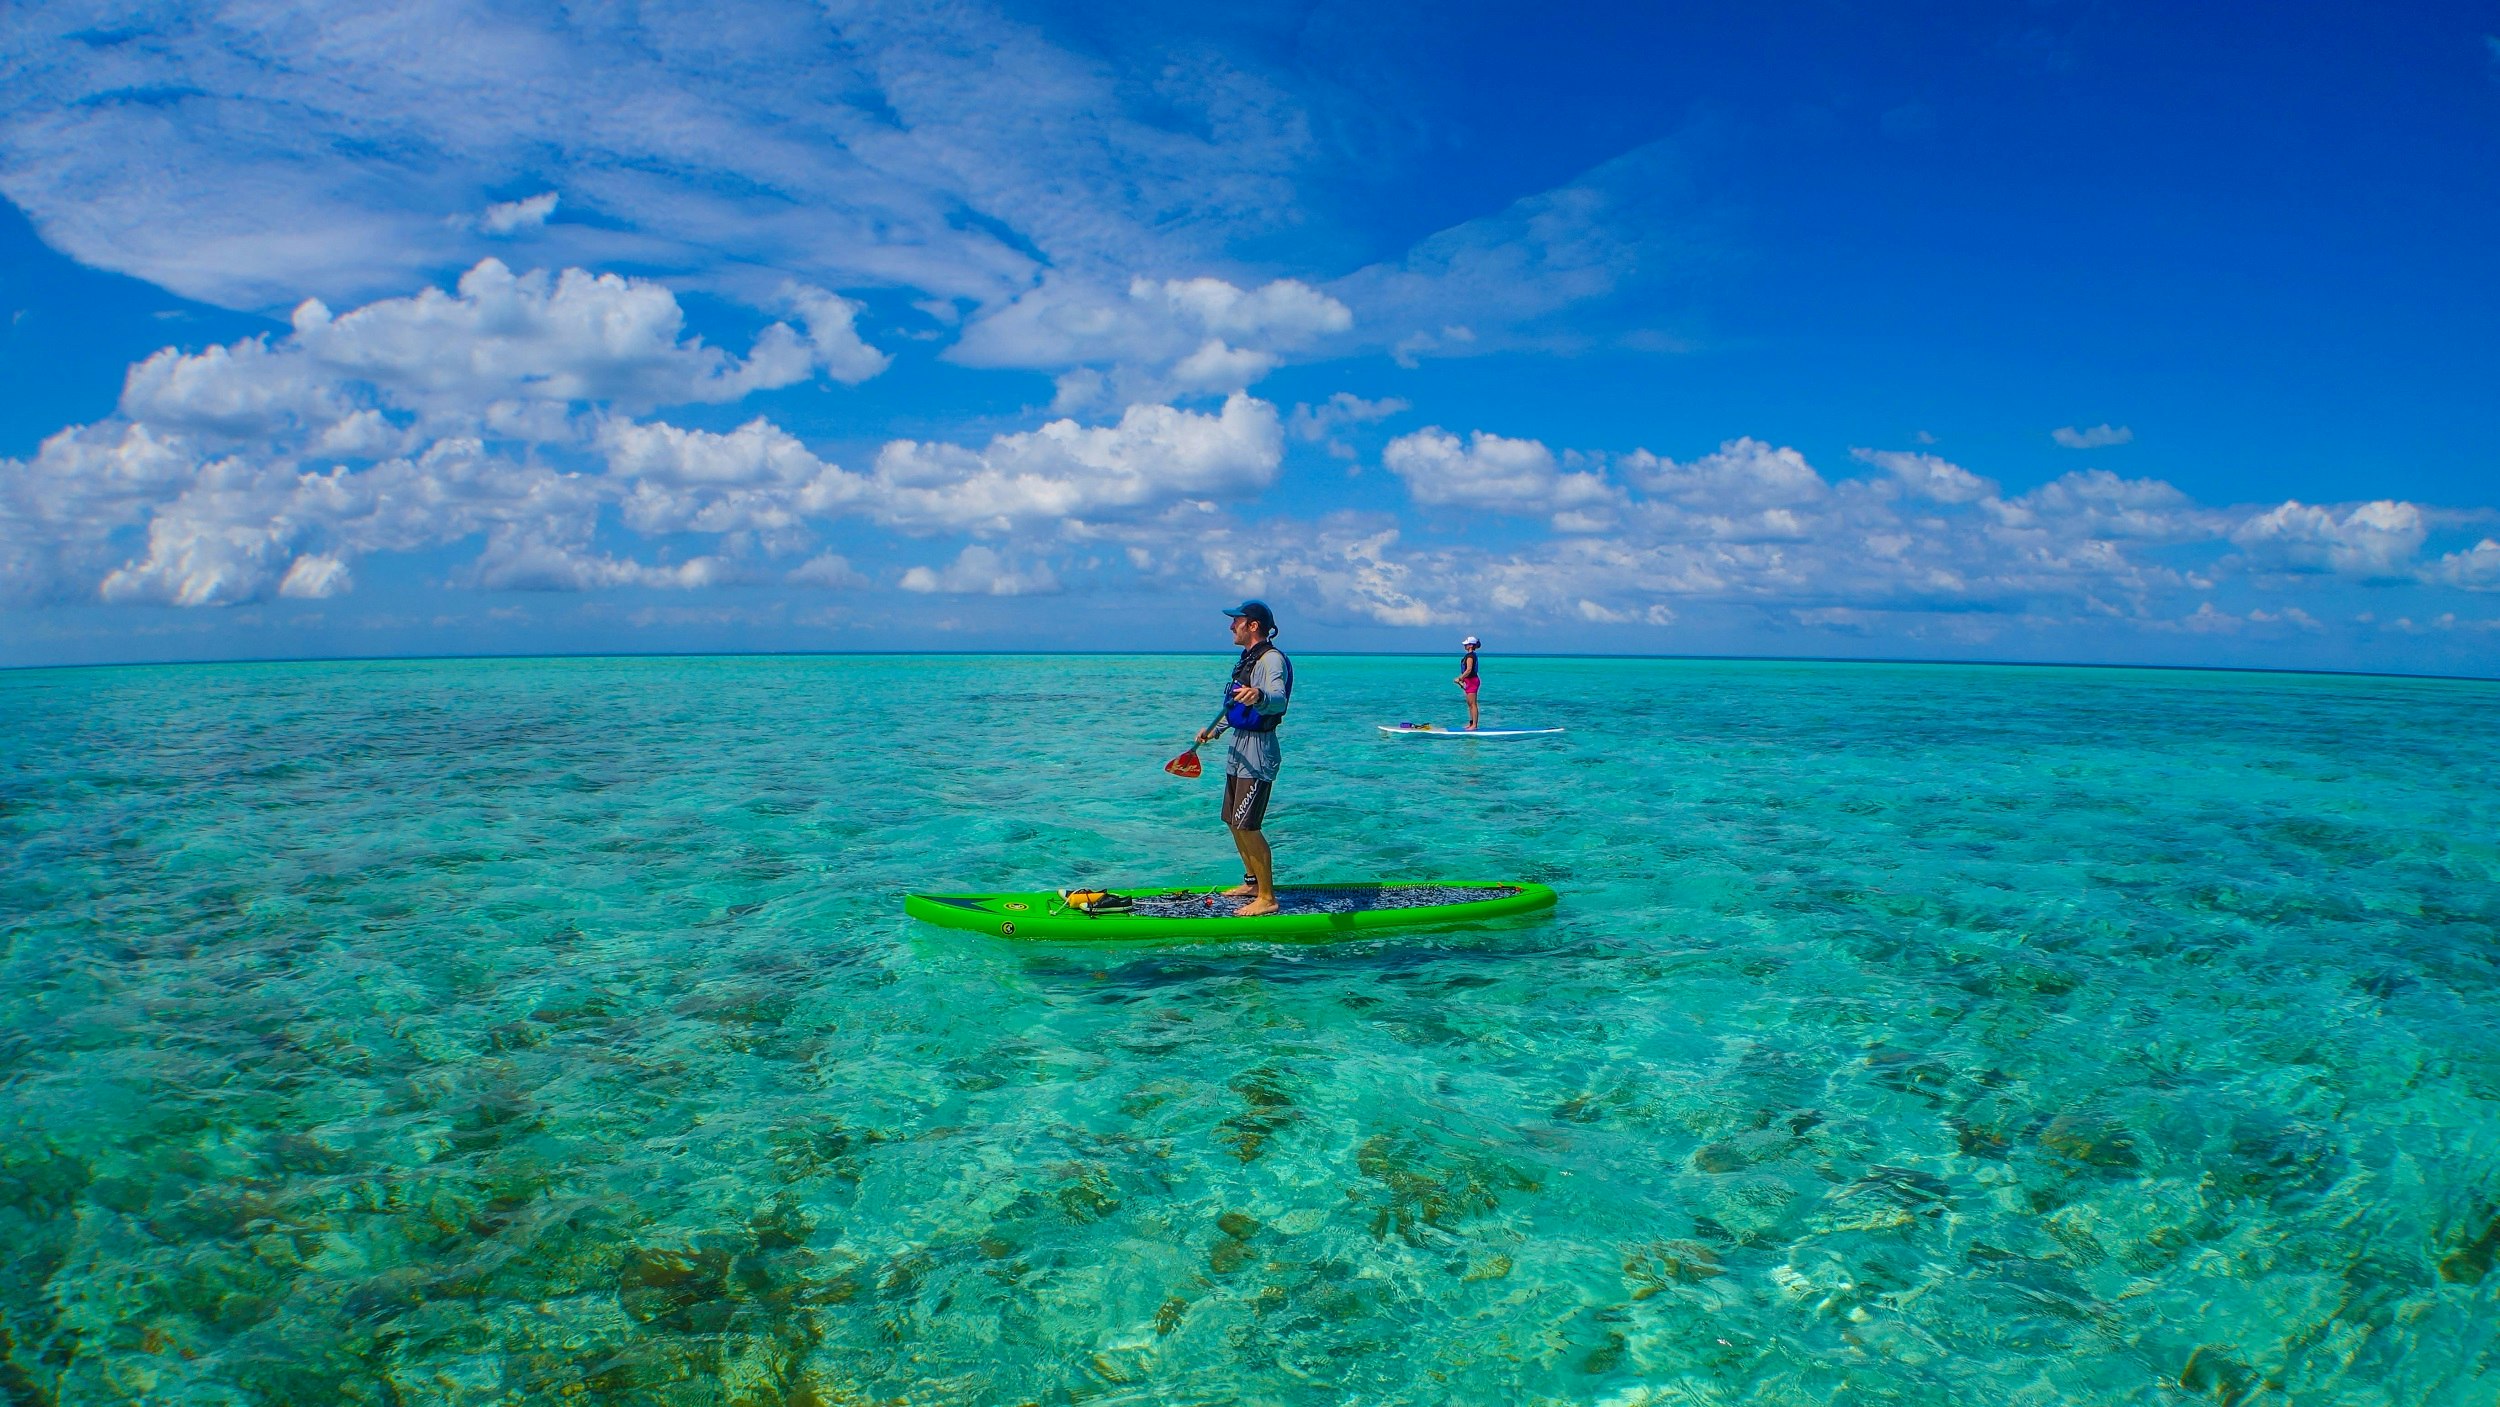 Two people, separated by 20-30m, both stand on paddle boards atop azure-coloured water, with blue skies above.